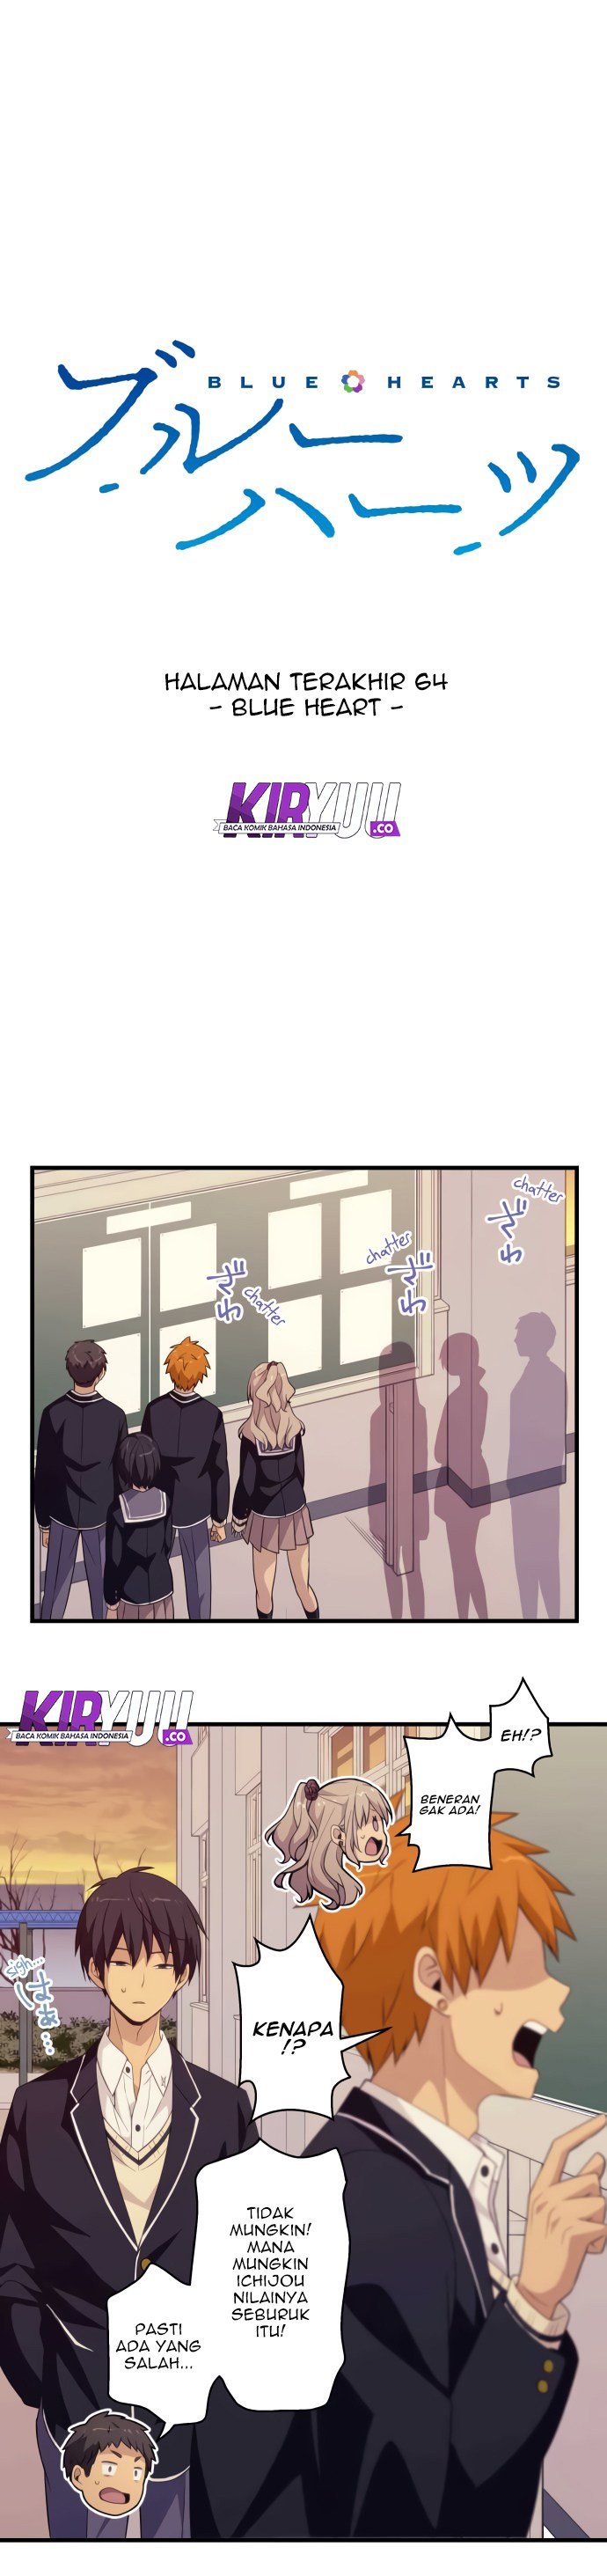 Blue Hearts Chapter 64 End